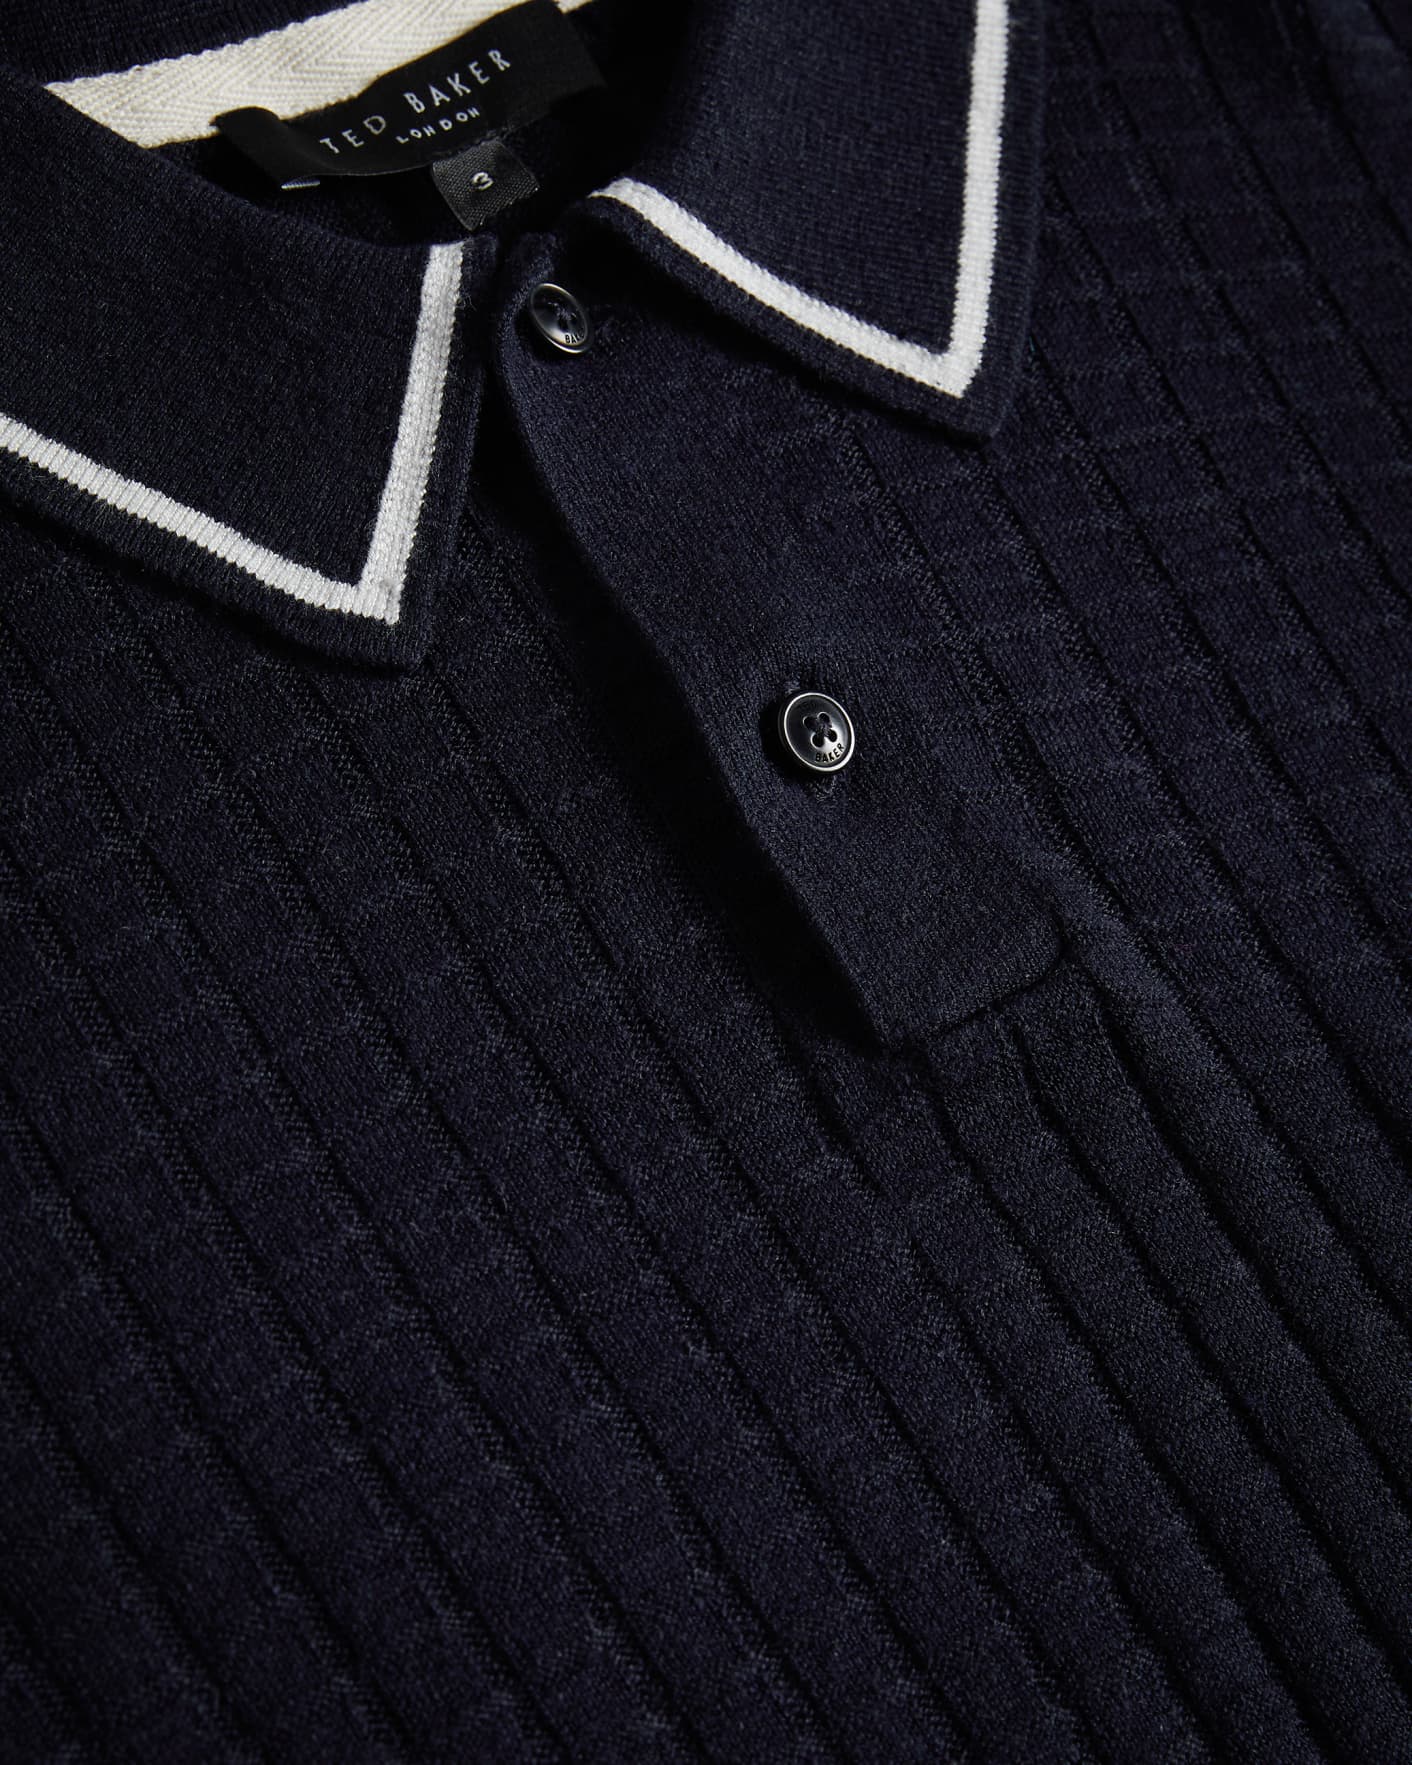 Navy Knitted Stitch Polo Shirt Ted Baker